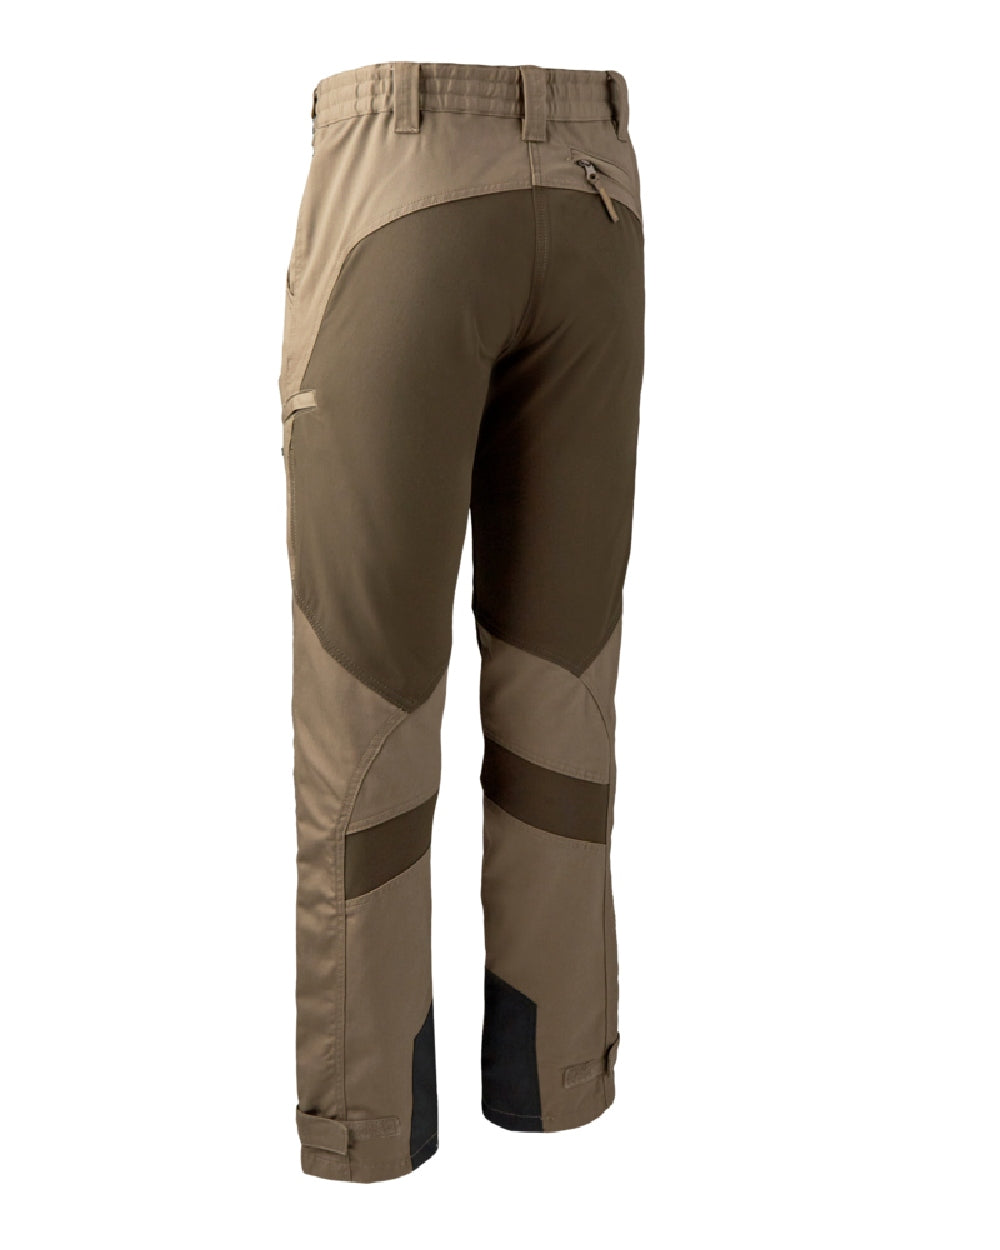 Deerhunter Rogaland Contrast Stretch Trousers in Driftwood 